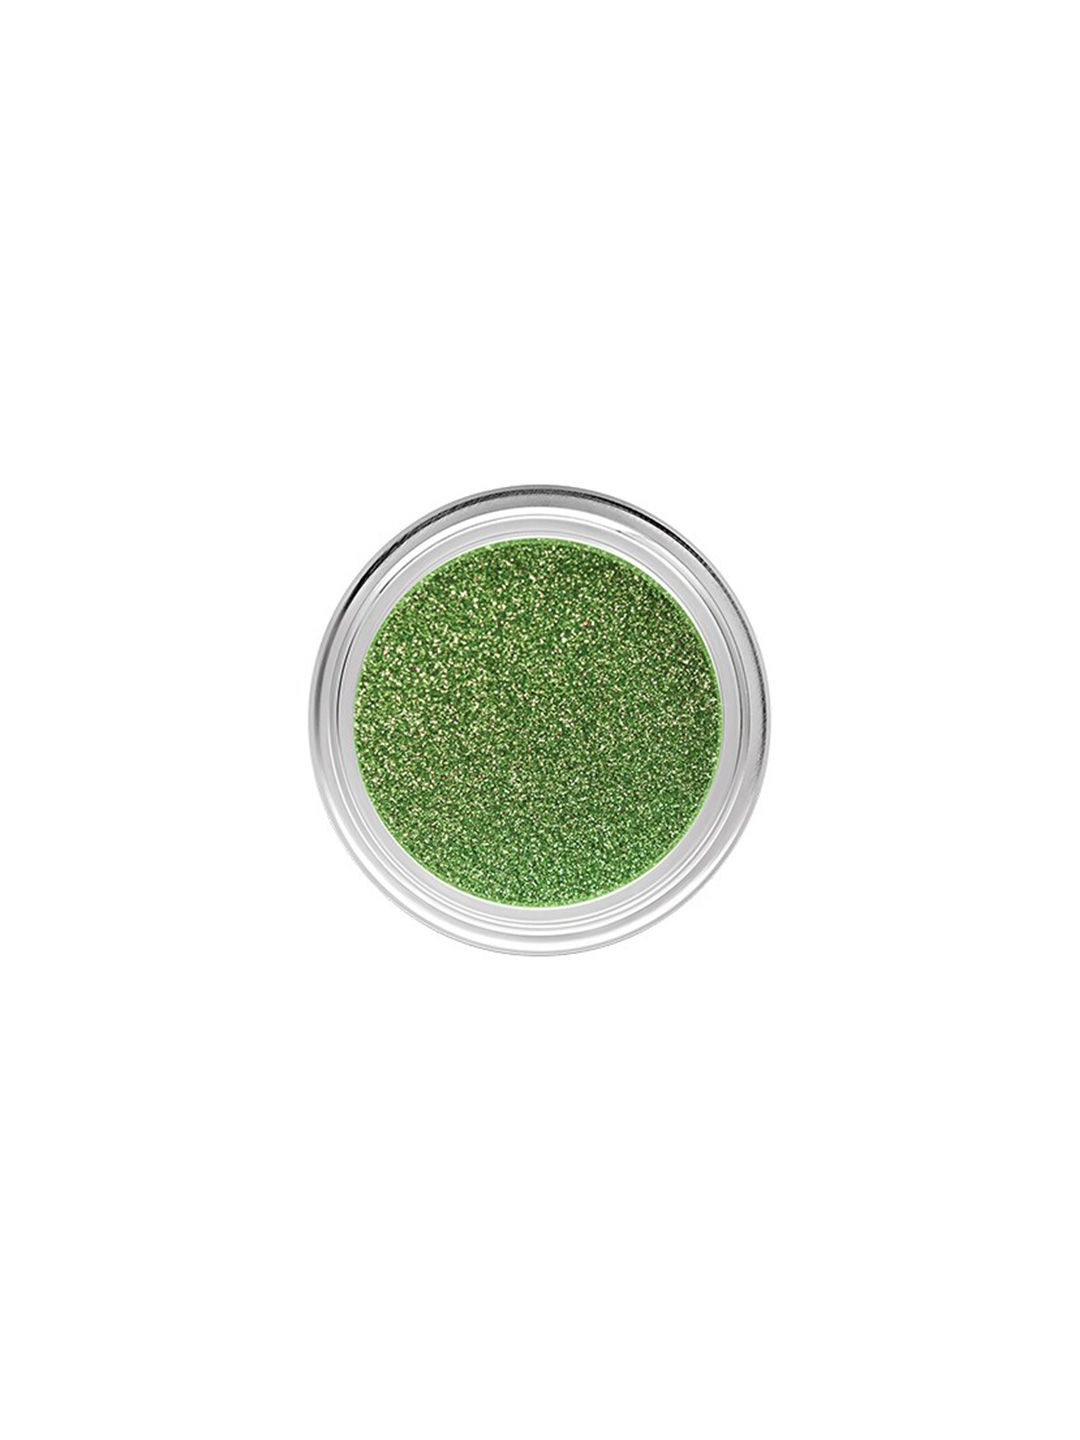 C2P PROFESSIONAL MAKEUP Uptown Loose Glitters Eyeshadow - Green Day 14 Price in India